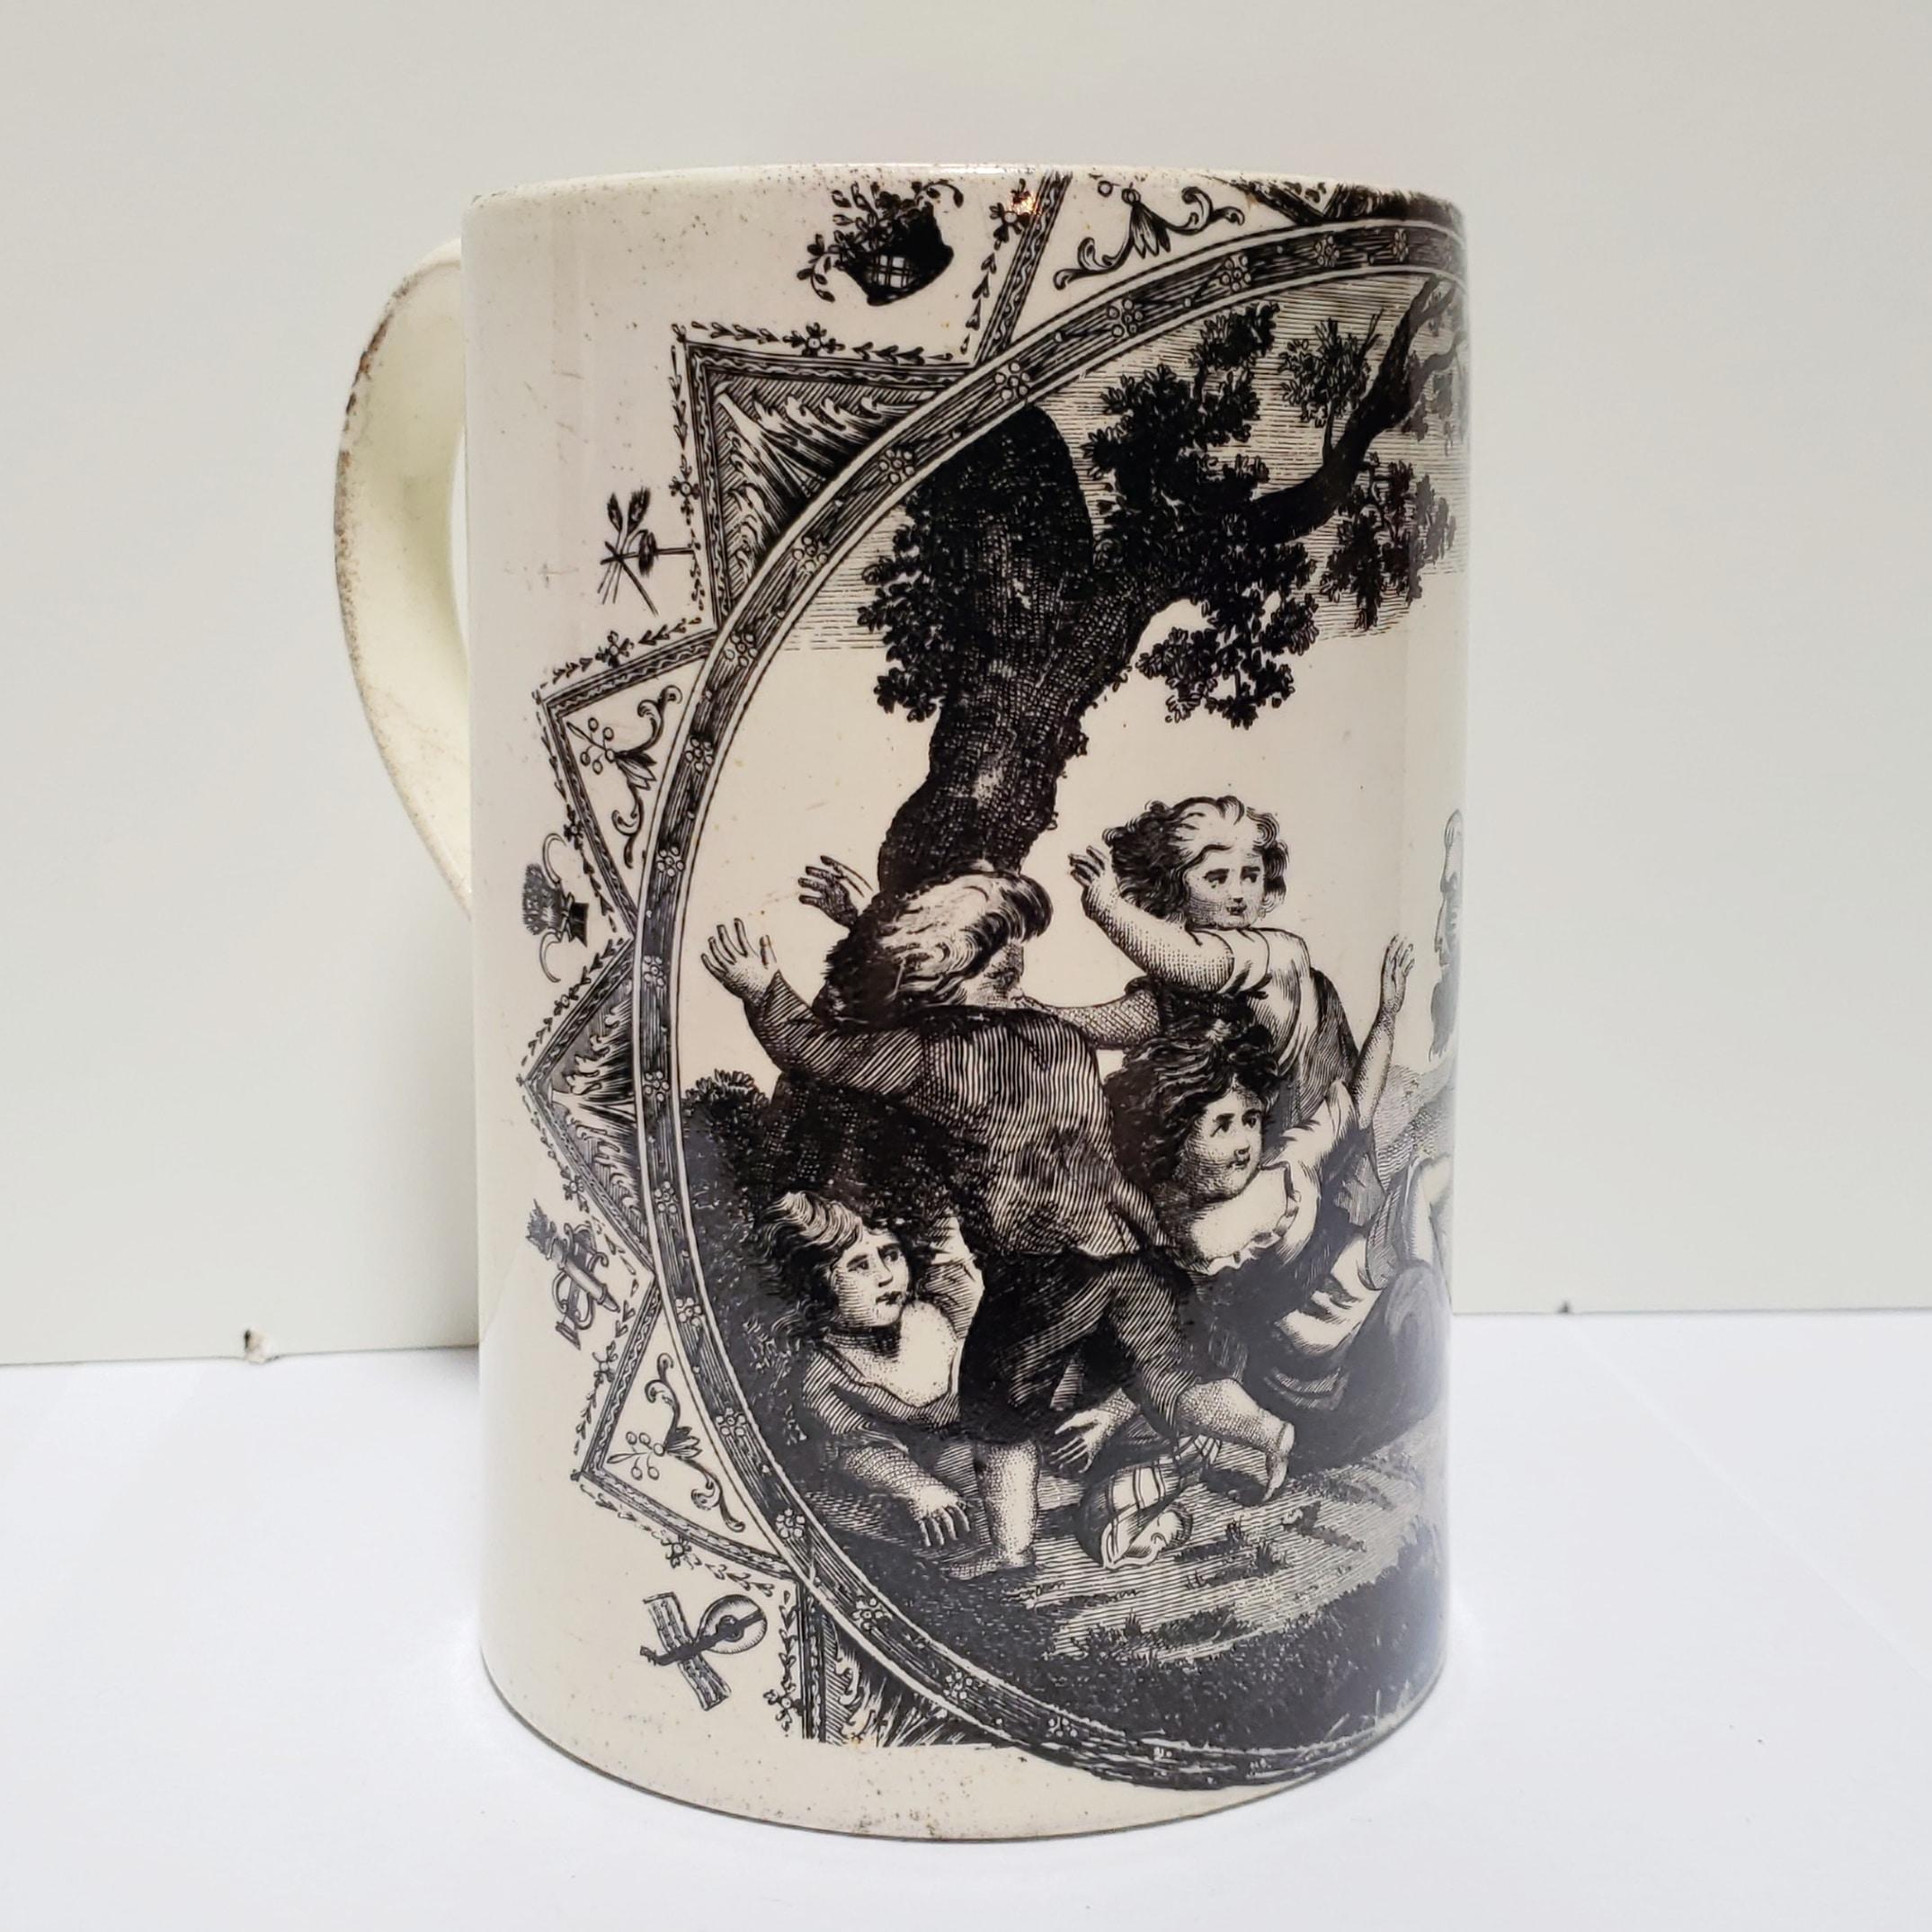 A pottery creamware handled mug with a black transfer printed framed picture of children being frightened by demonic mask. The majority of these late 18th century creamware pieces are attributed to potteries in and around Liverpool, England. This